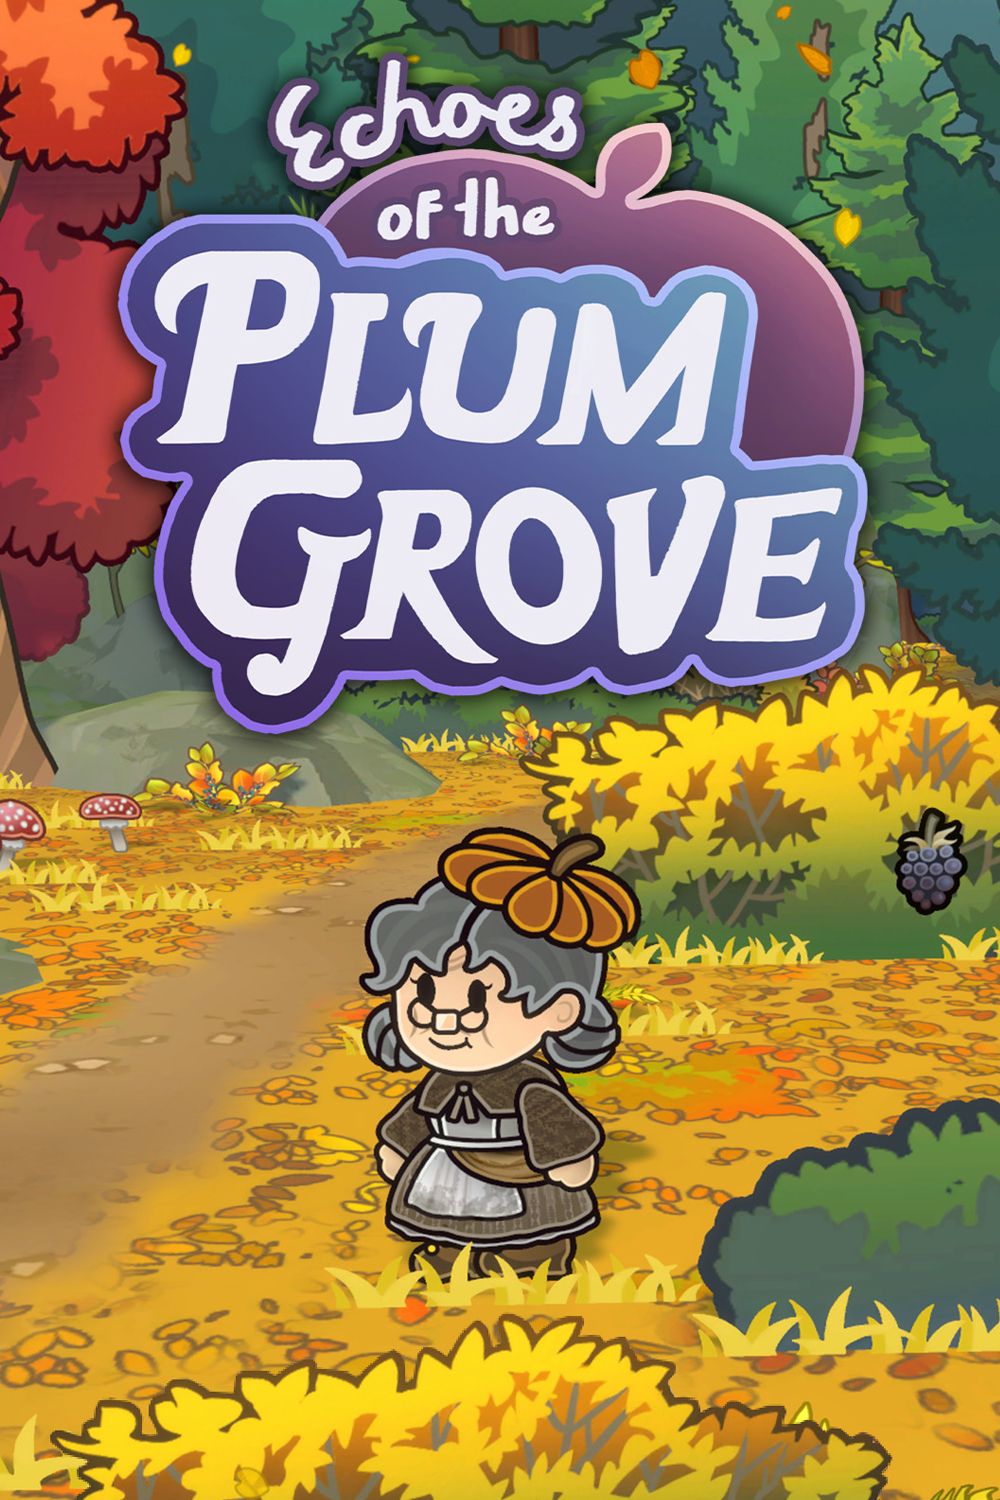 echoes-of-the-plum-grove-cover